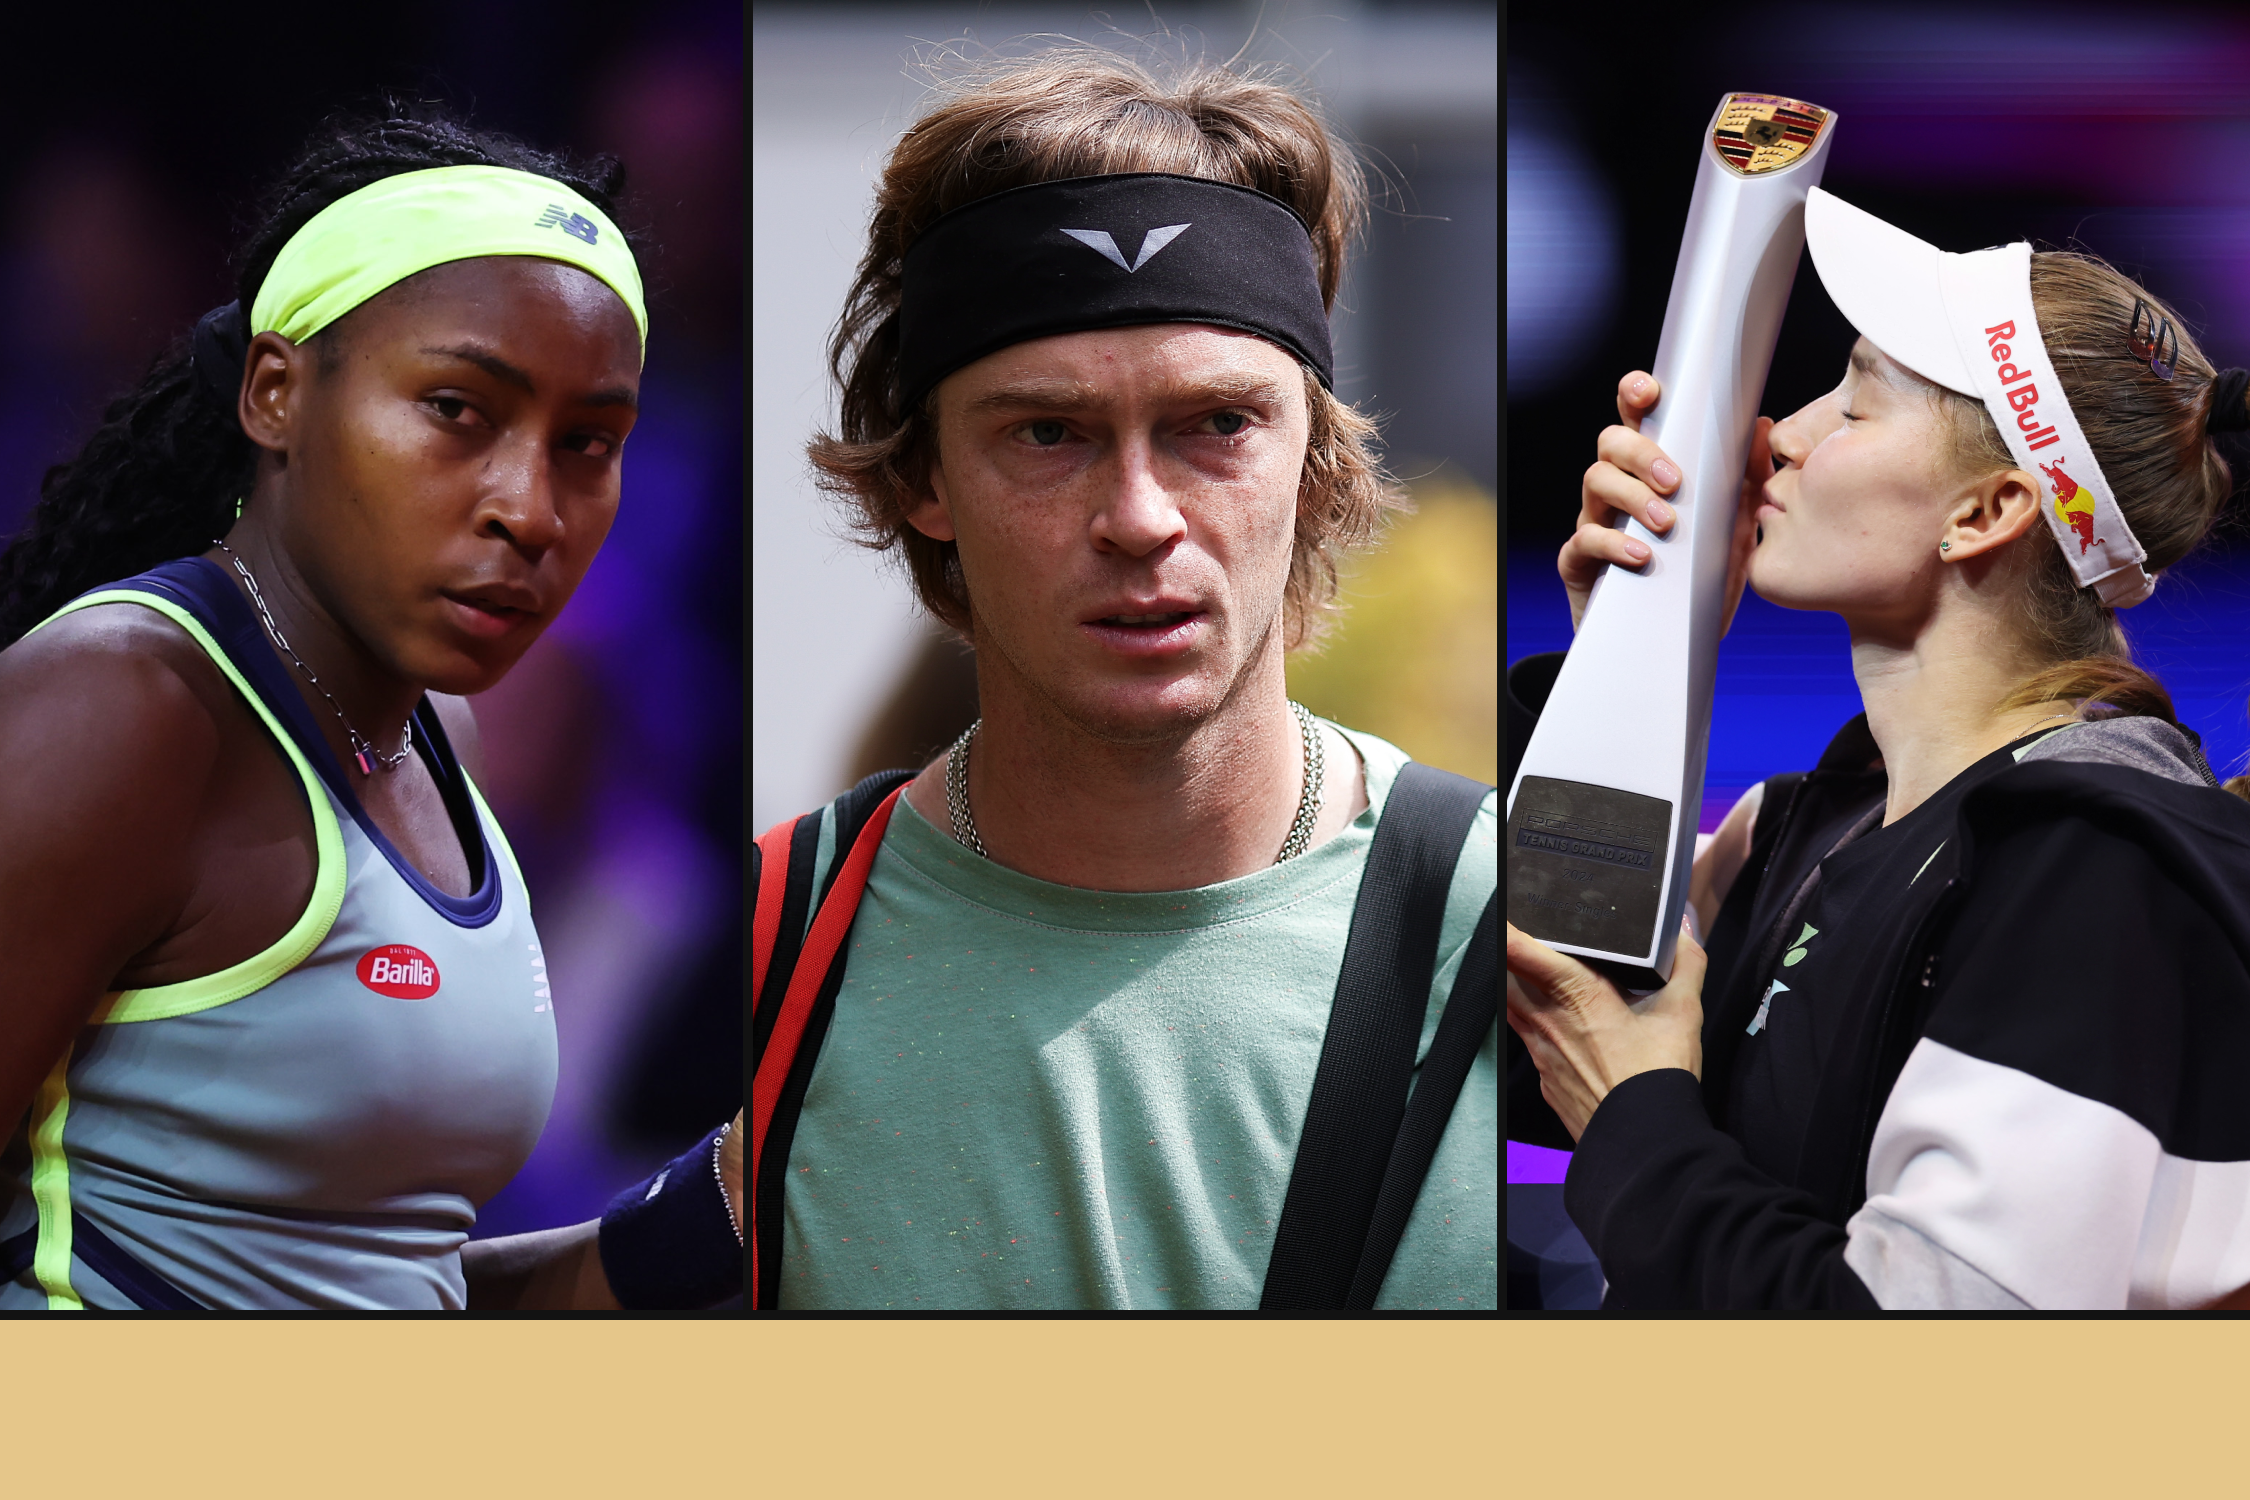 Tennis briefing: will there be a WTA 'Big Four'?  What does Andrei Rublev eat?